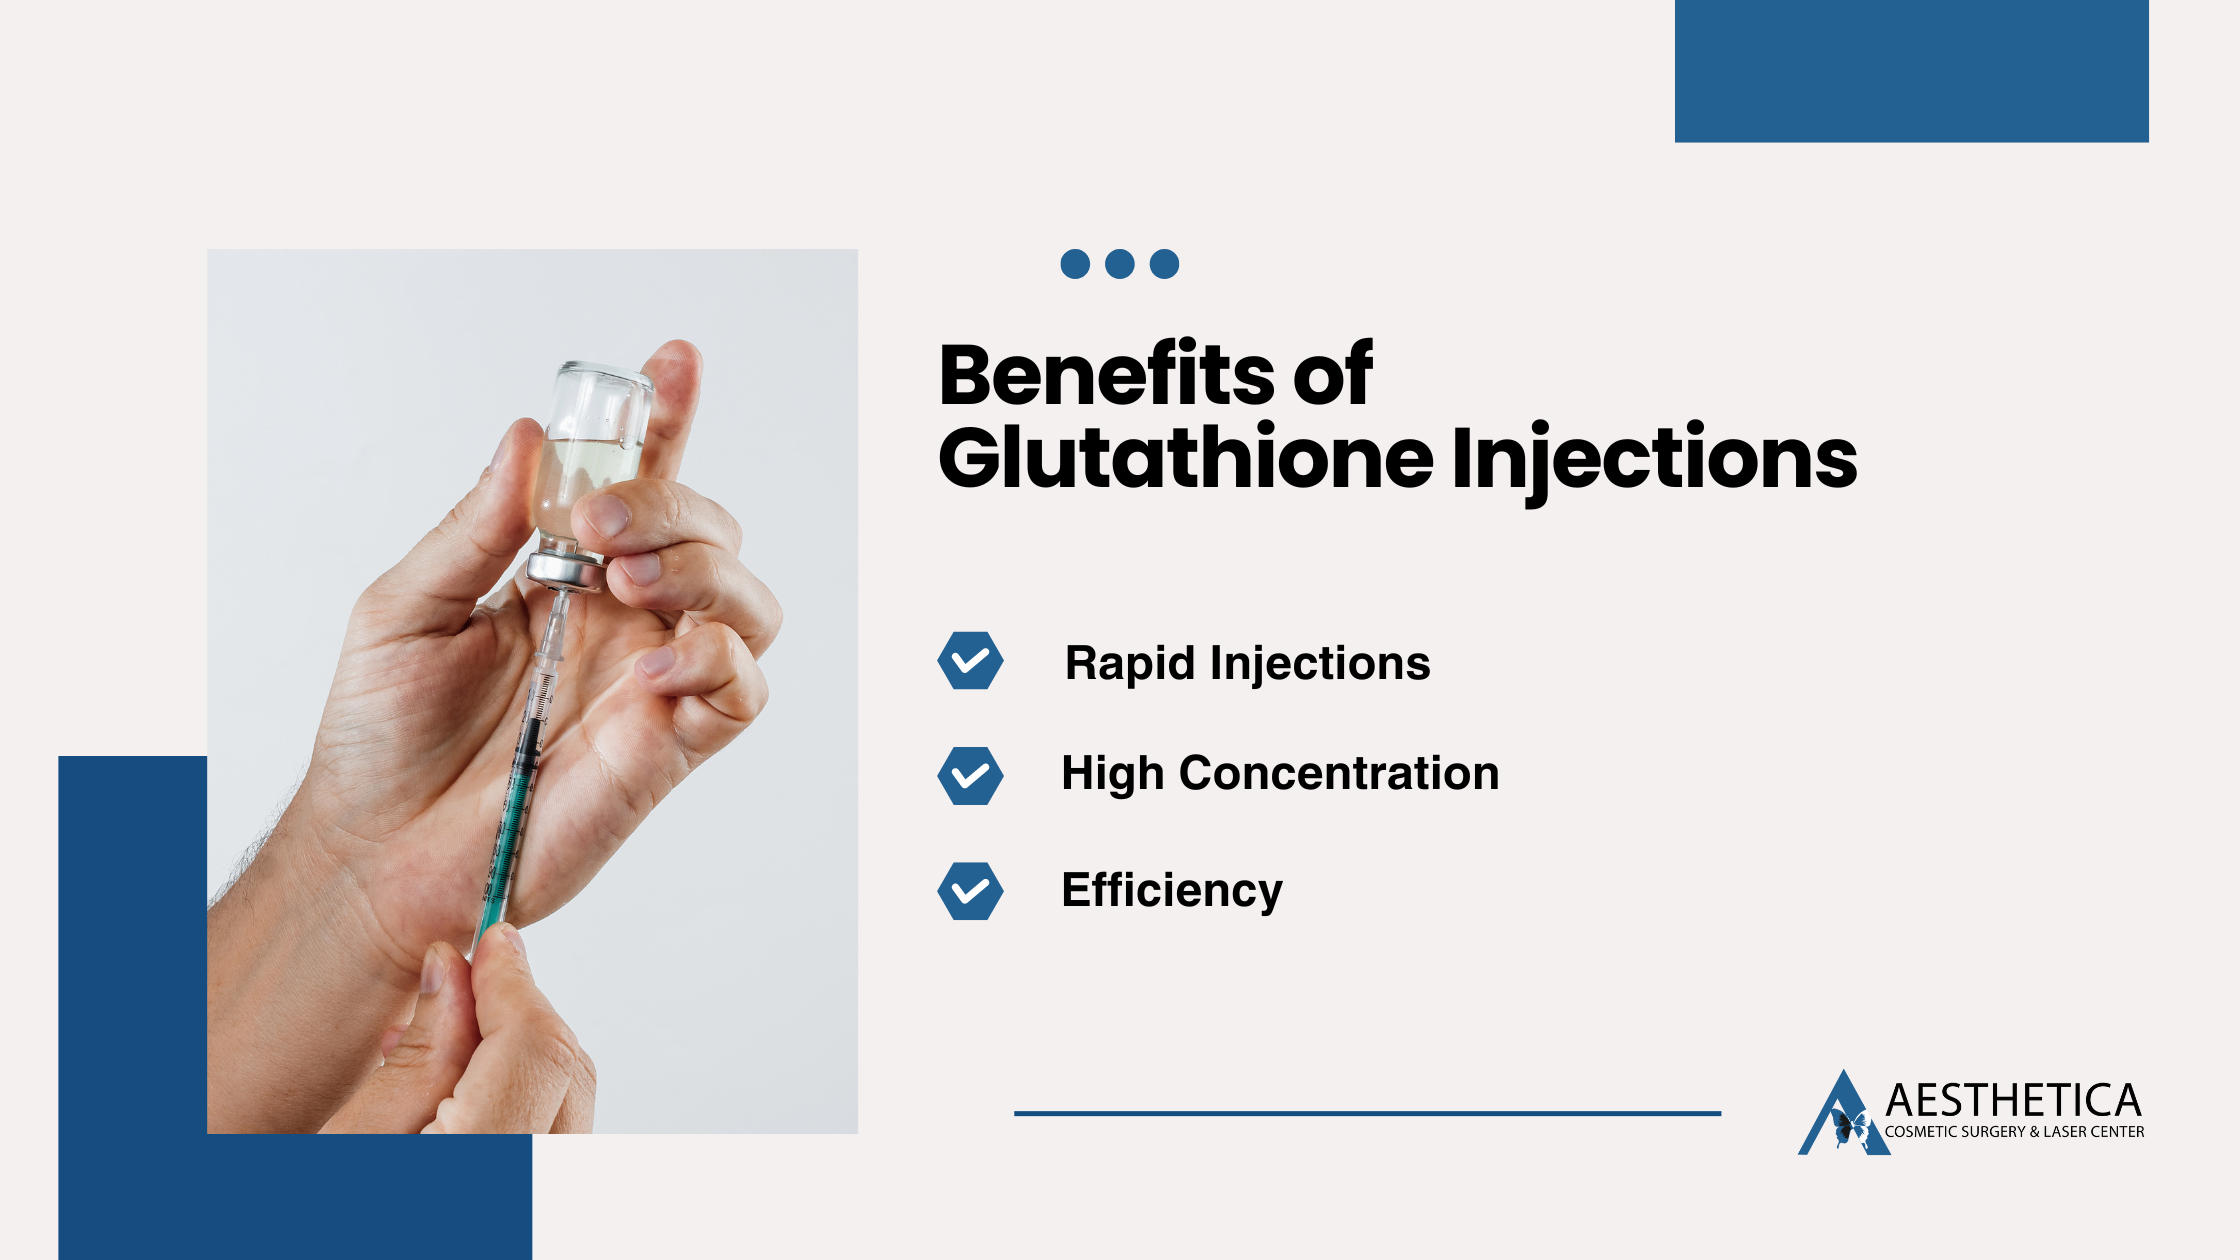 Benefits of Glutathione Injections